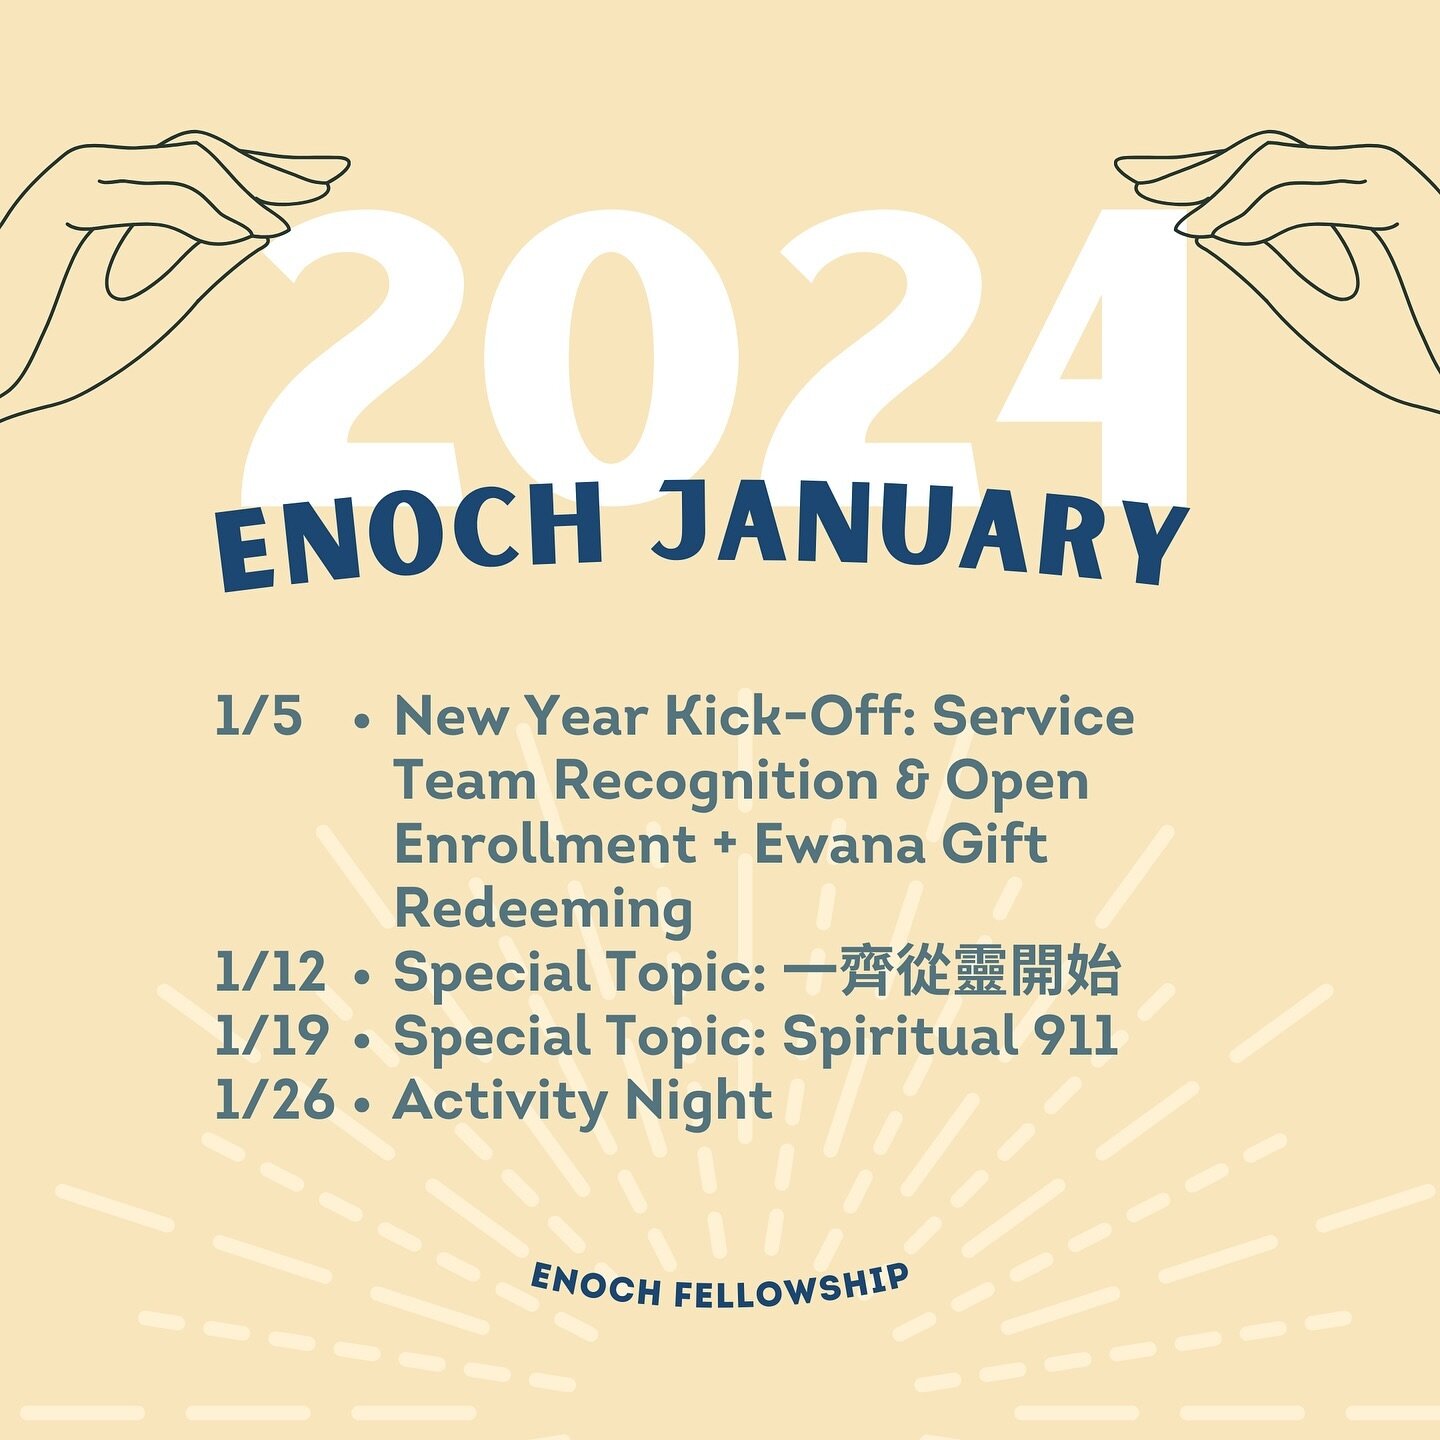 Hello brothers &amp; sisters, 
Here is our schedule of Enoch fellowship in January. Happy 2024! Stay tuned ✨❤️